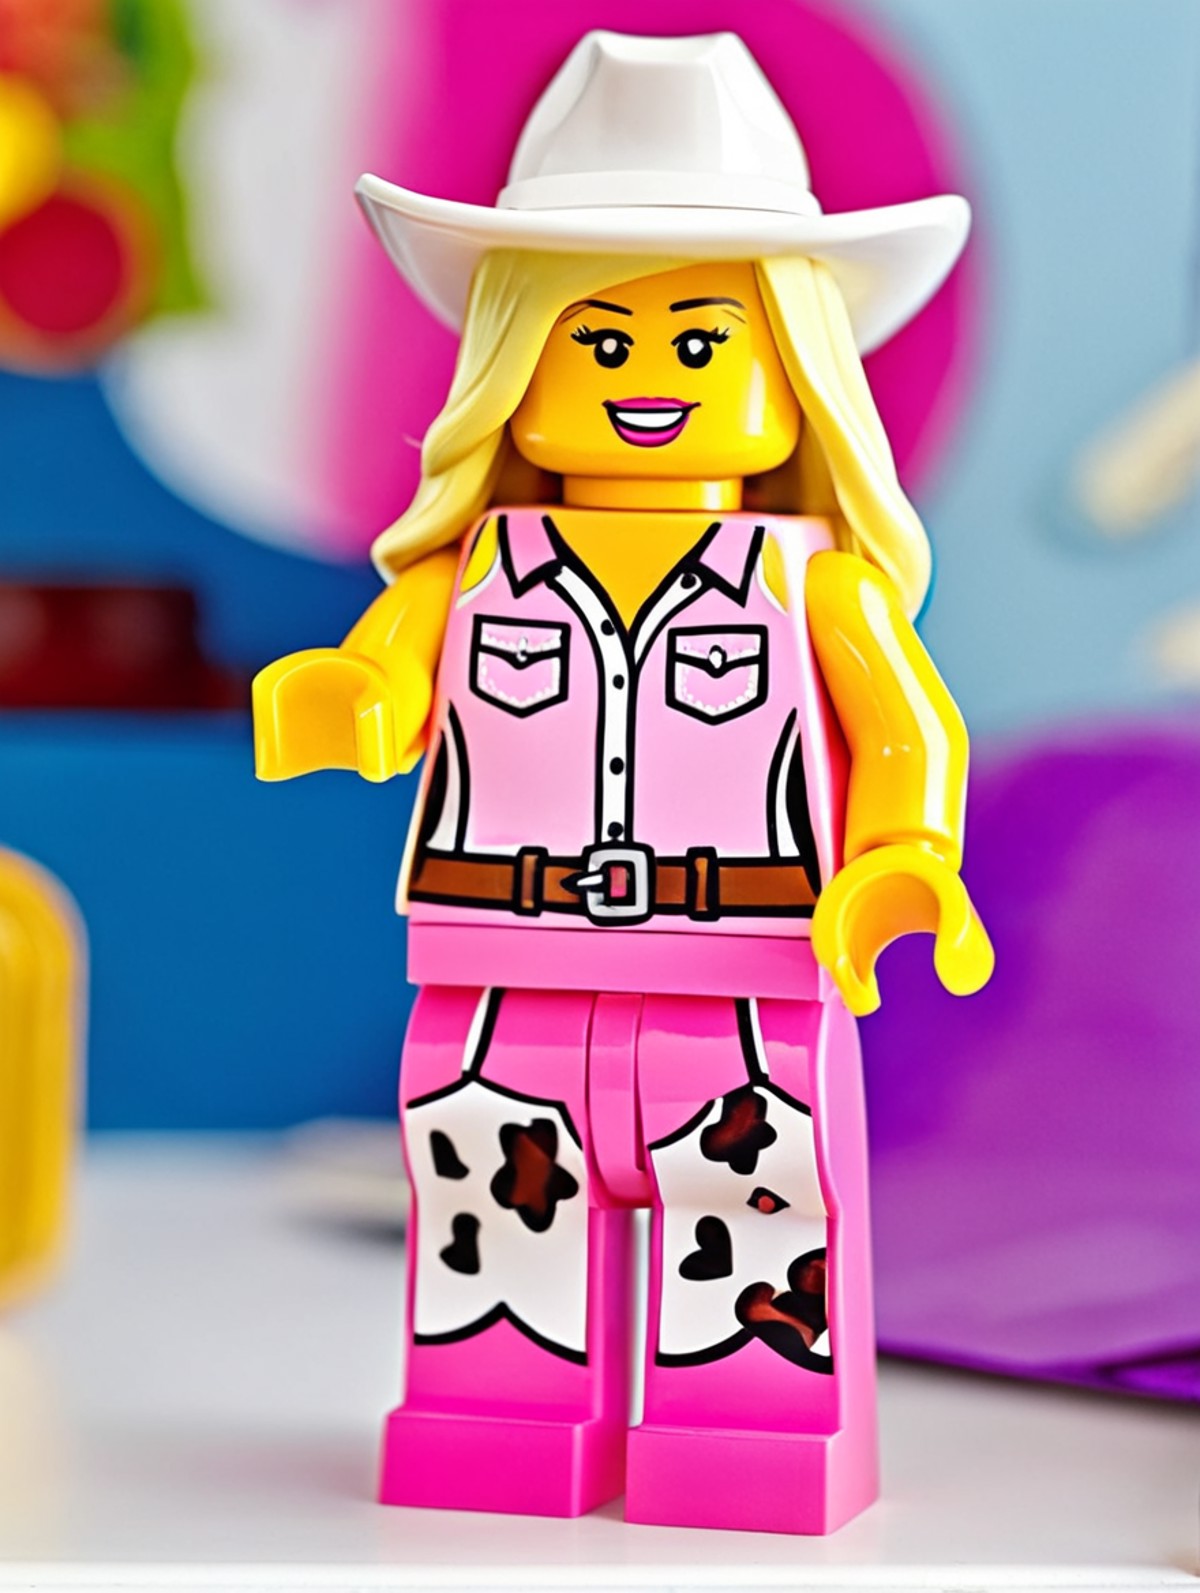 <lora:Lego_XL_v2.1:0.8>
LEGO MiniFig. 
A woman with platinum blonde hair exudes Barbie doll charm in a pink cowgirl outfit...